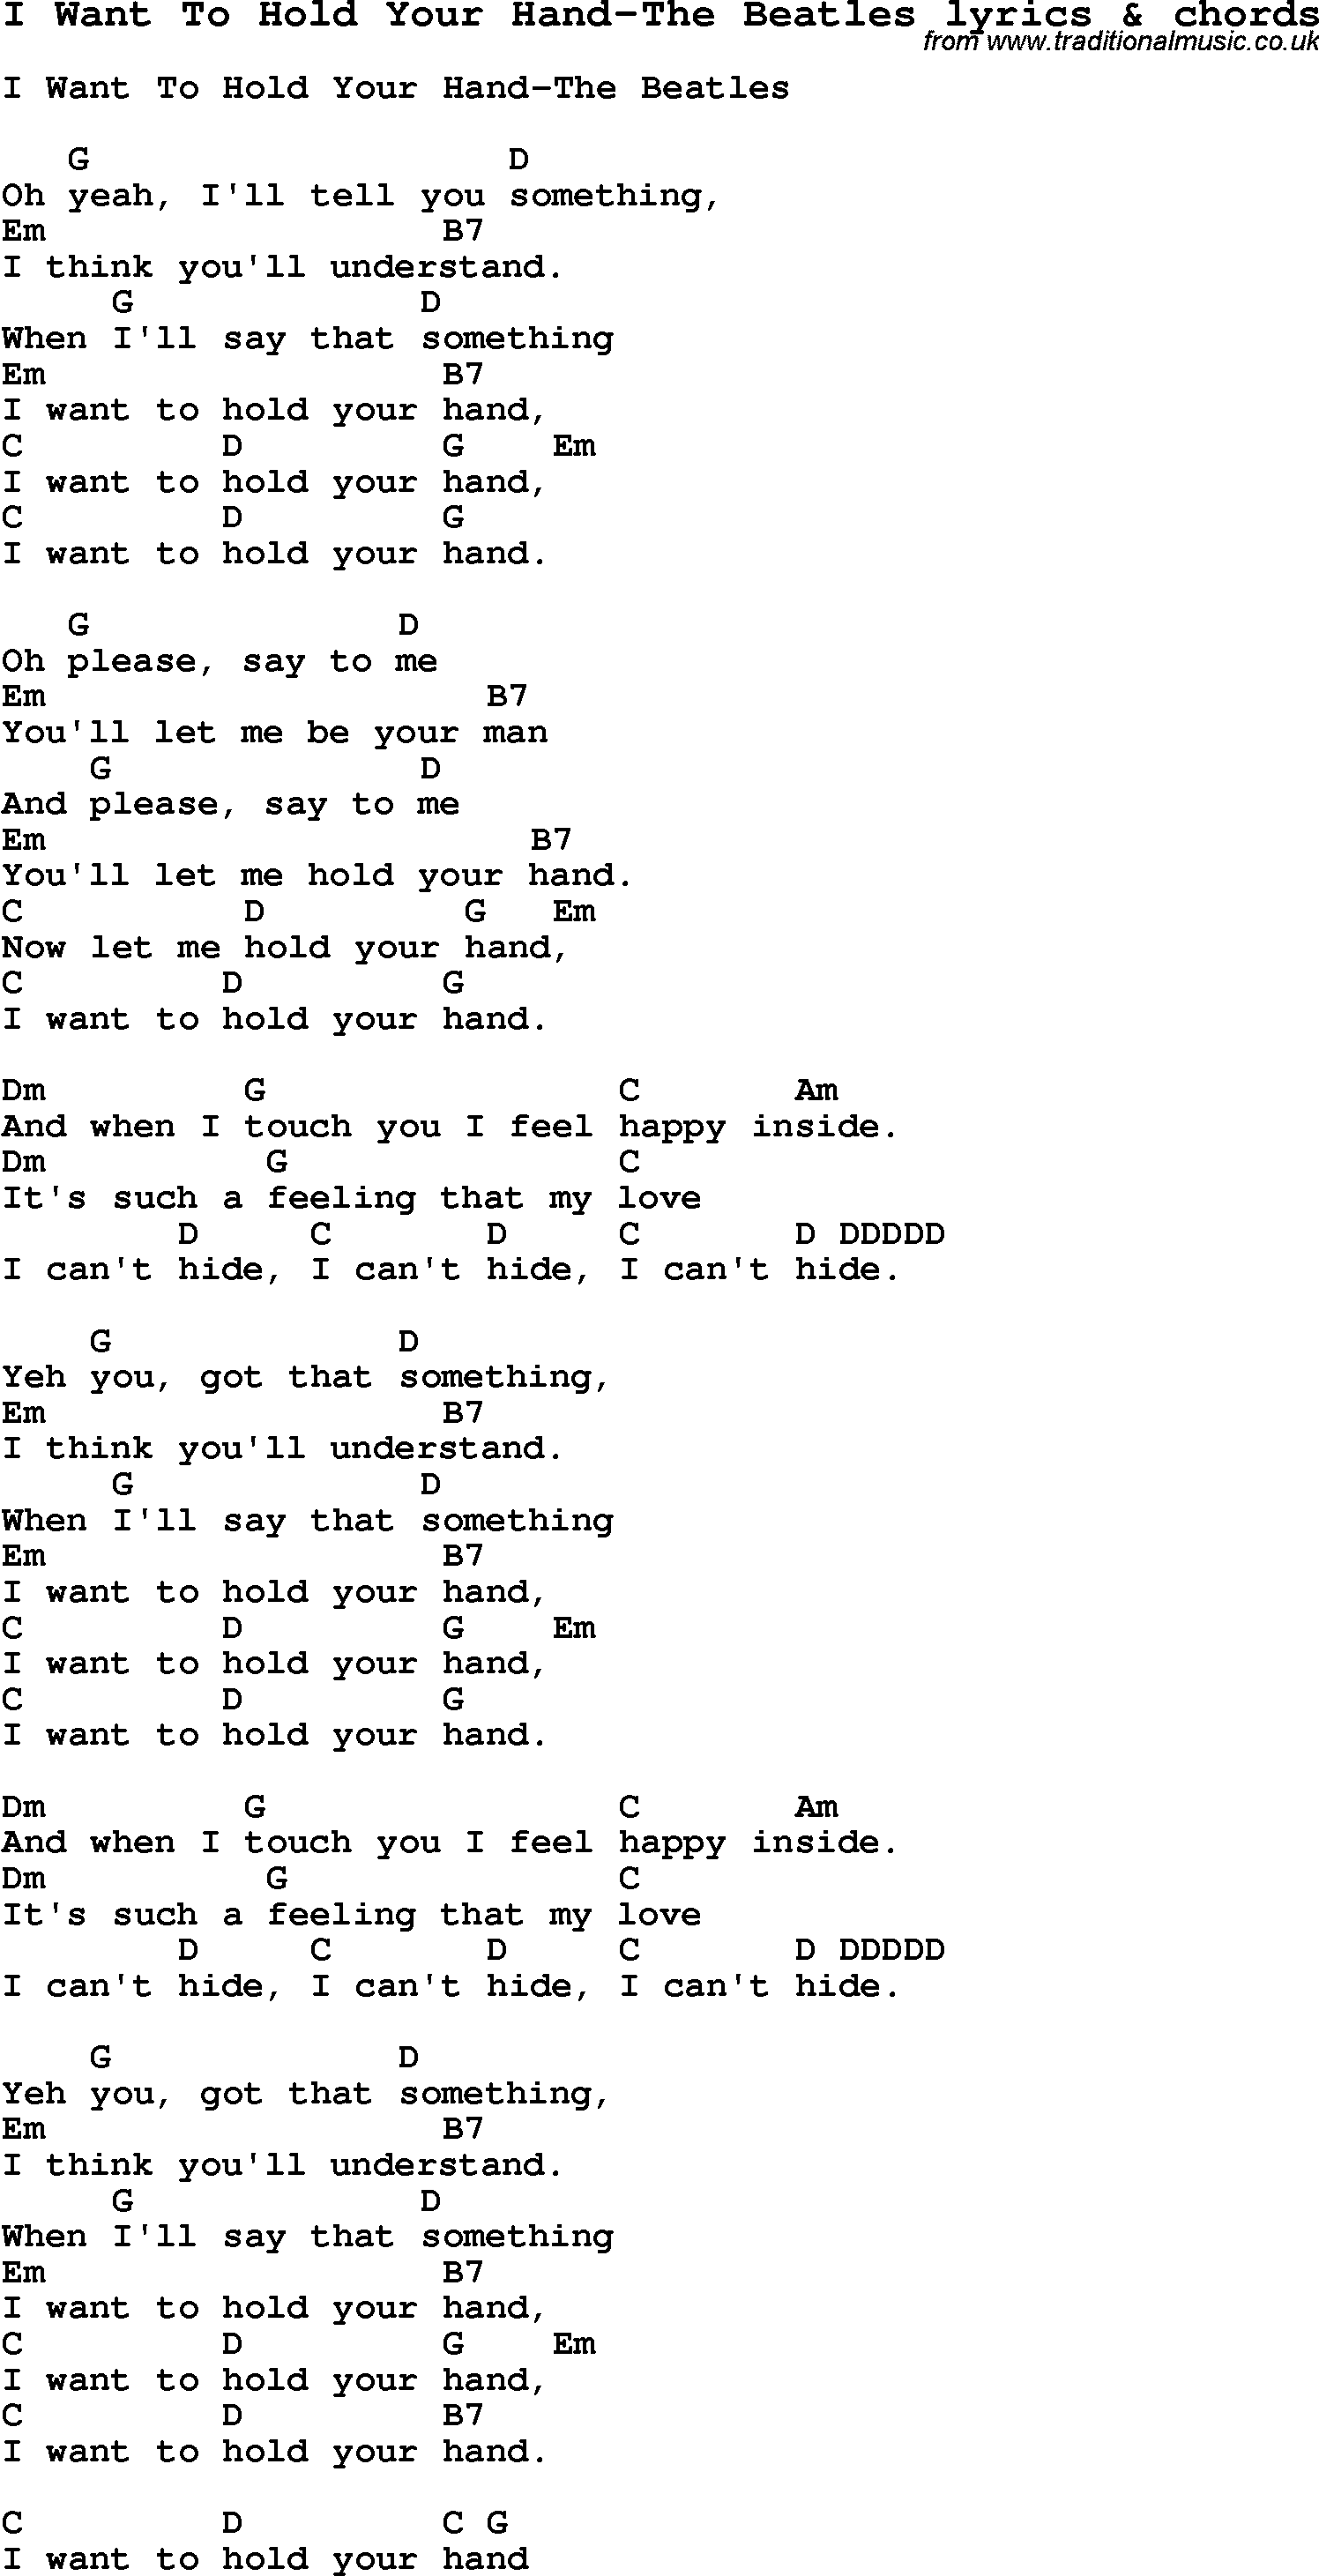 Love Song Lyrics for: I Want To Hold Your Hand-The Beatles with chords for Ukulele, Guitar Banjo etc.